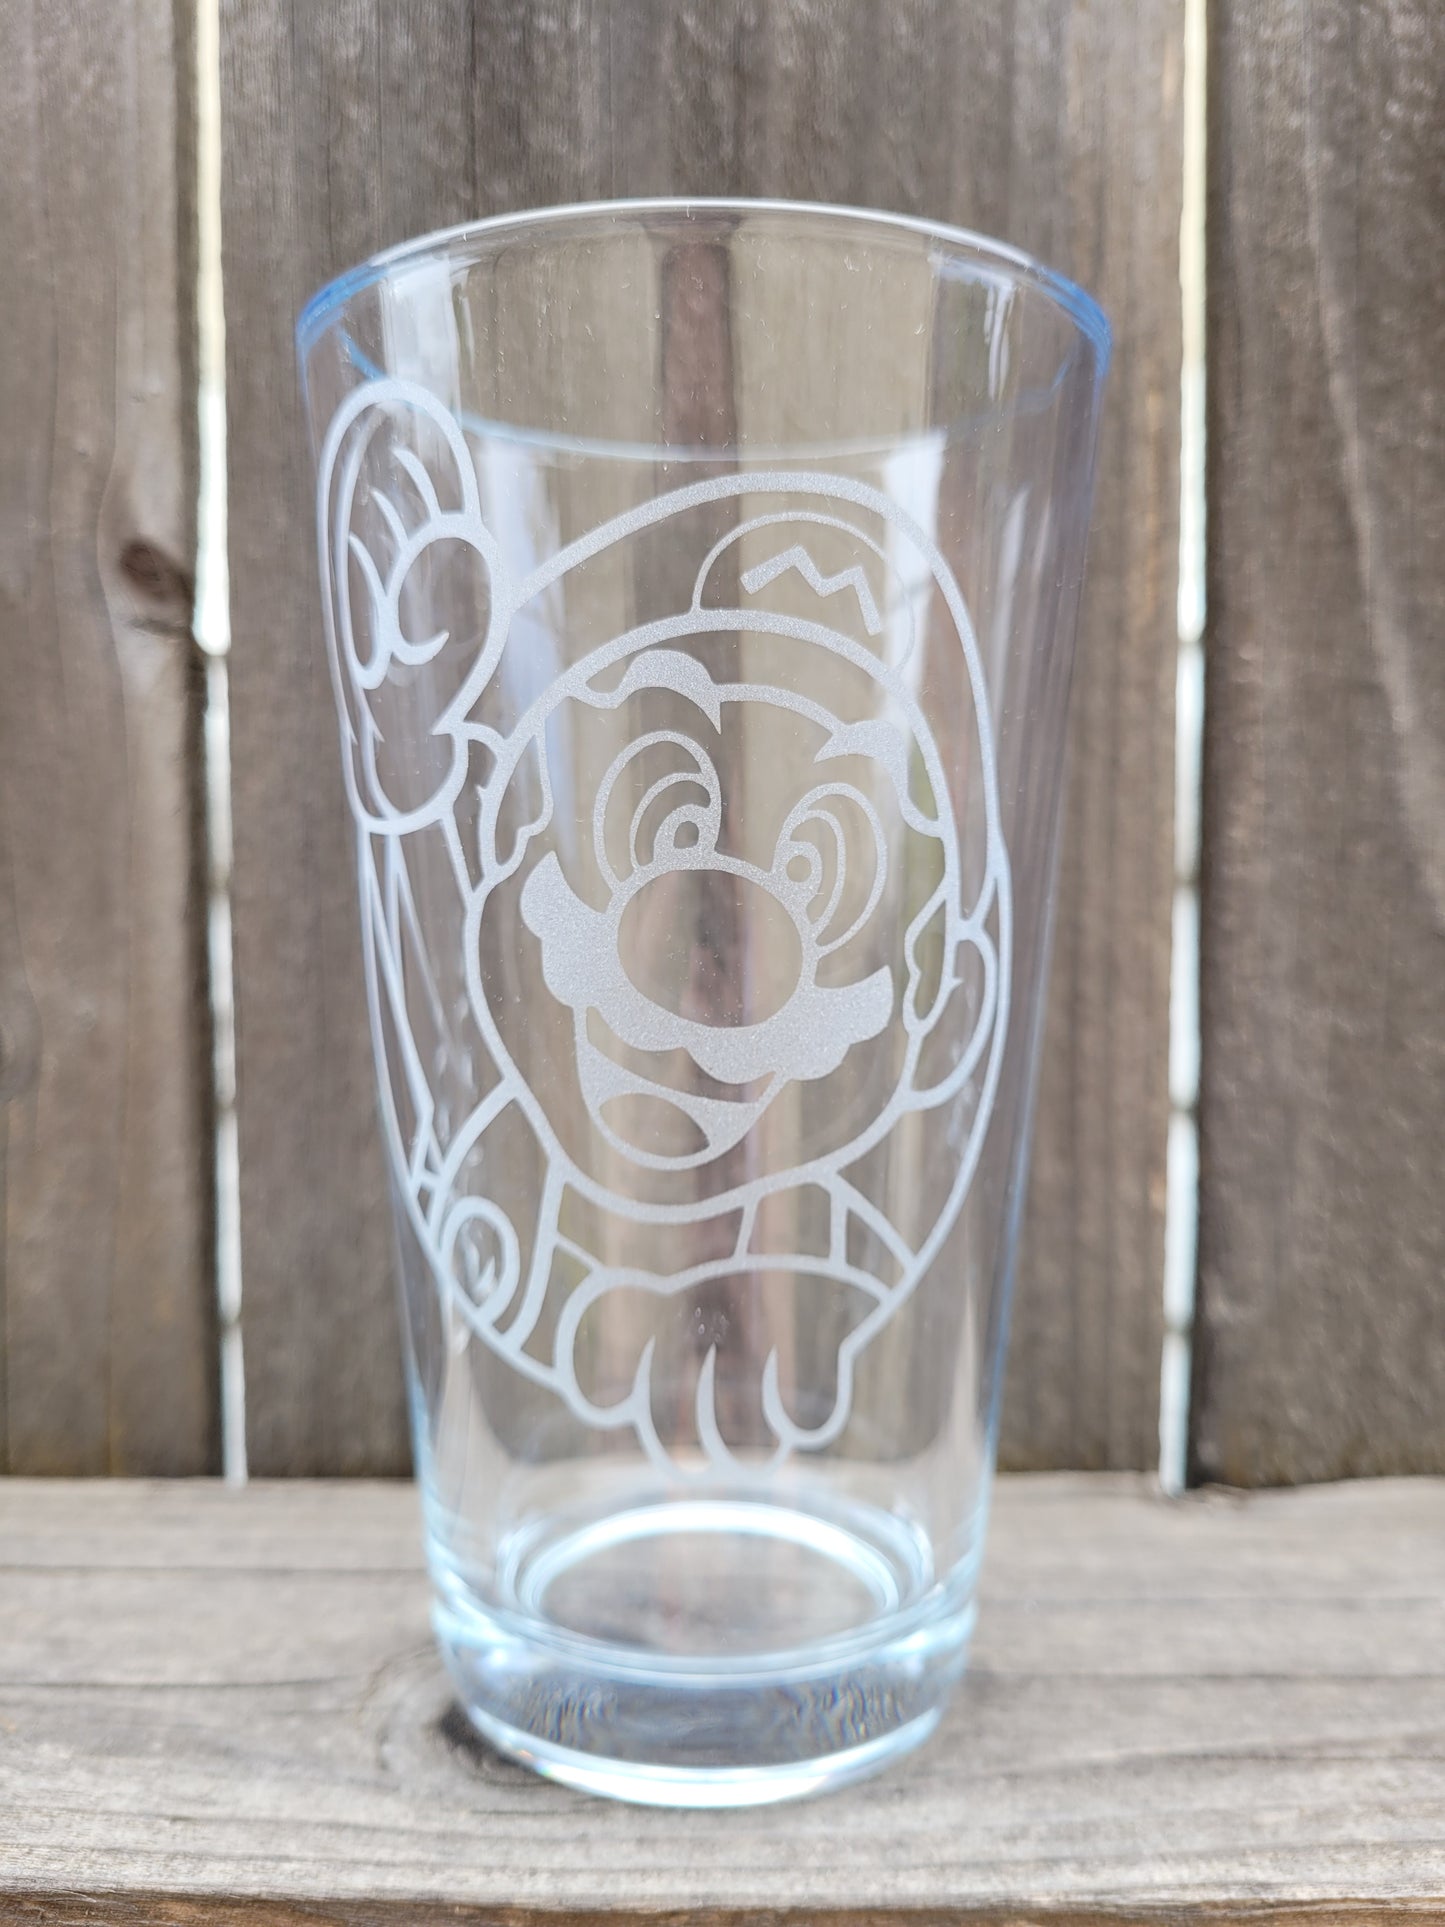 Mario Pint Glass - Made to Order